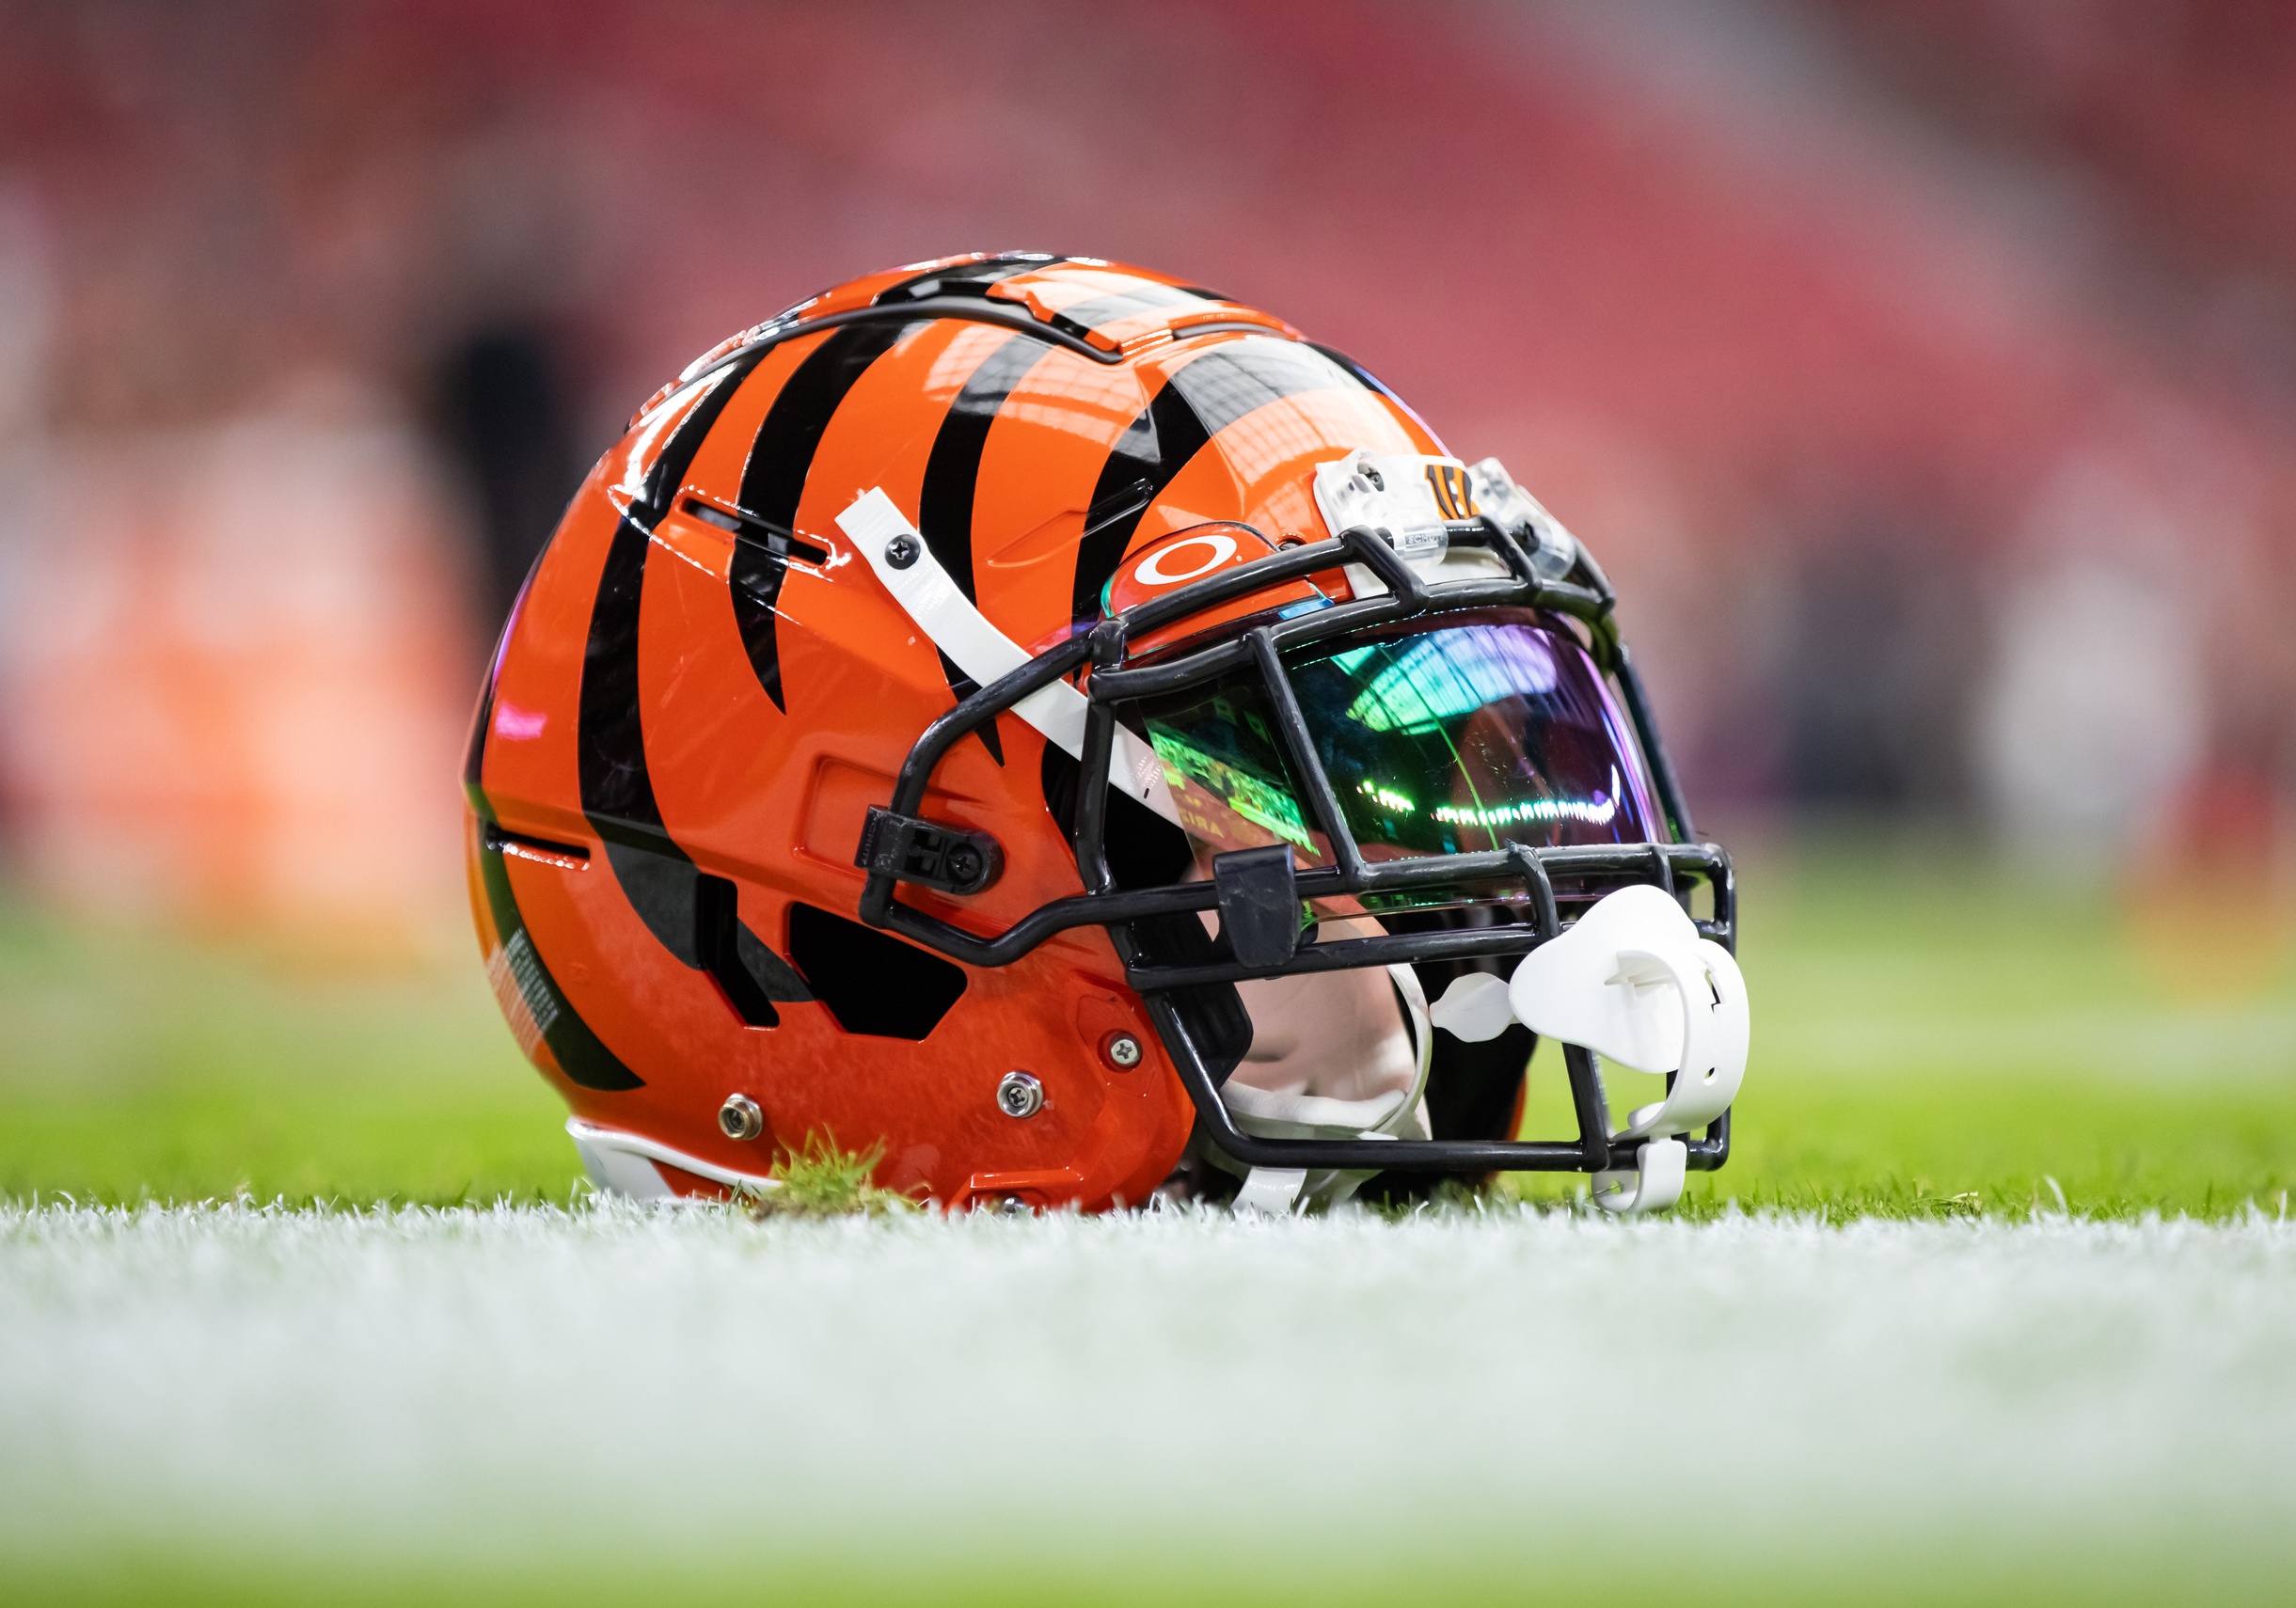 bengals refuse to trade star player